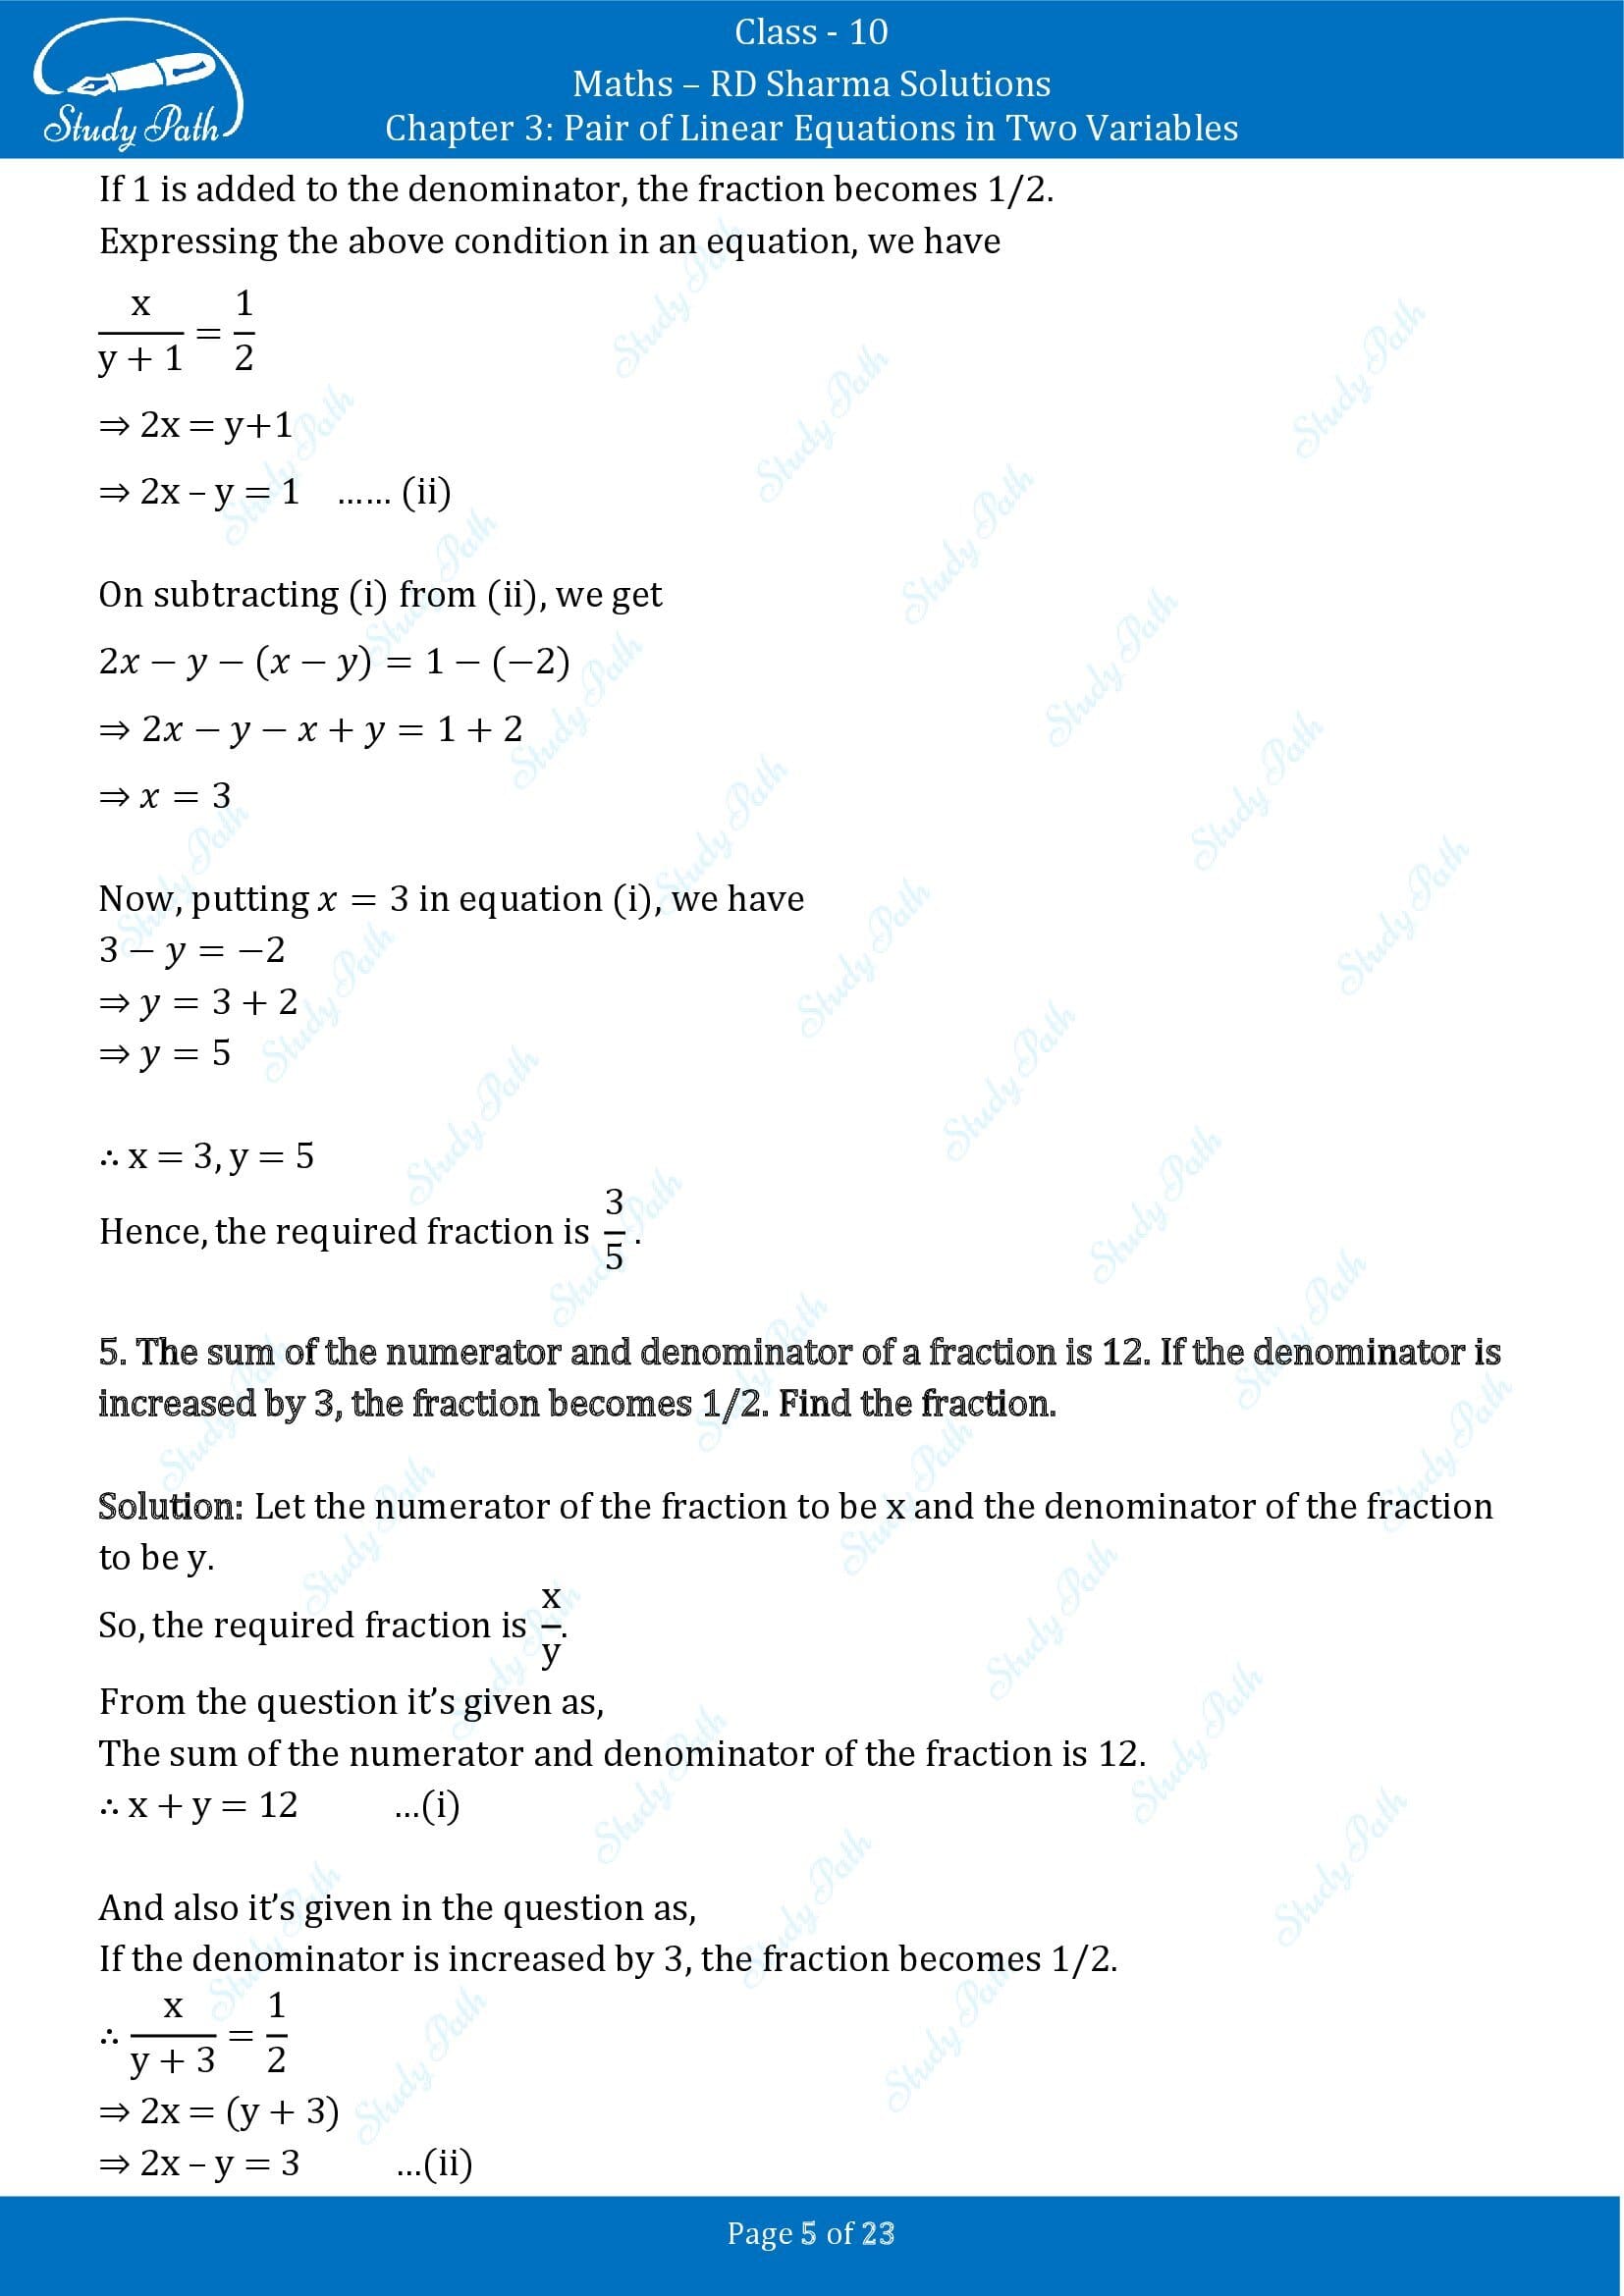 RD Sharma Solutions Class 10 Chapter 3 Pair of Linear Equations in Two Variables Exercise 3.8 00005